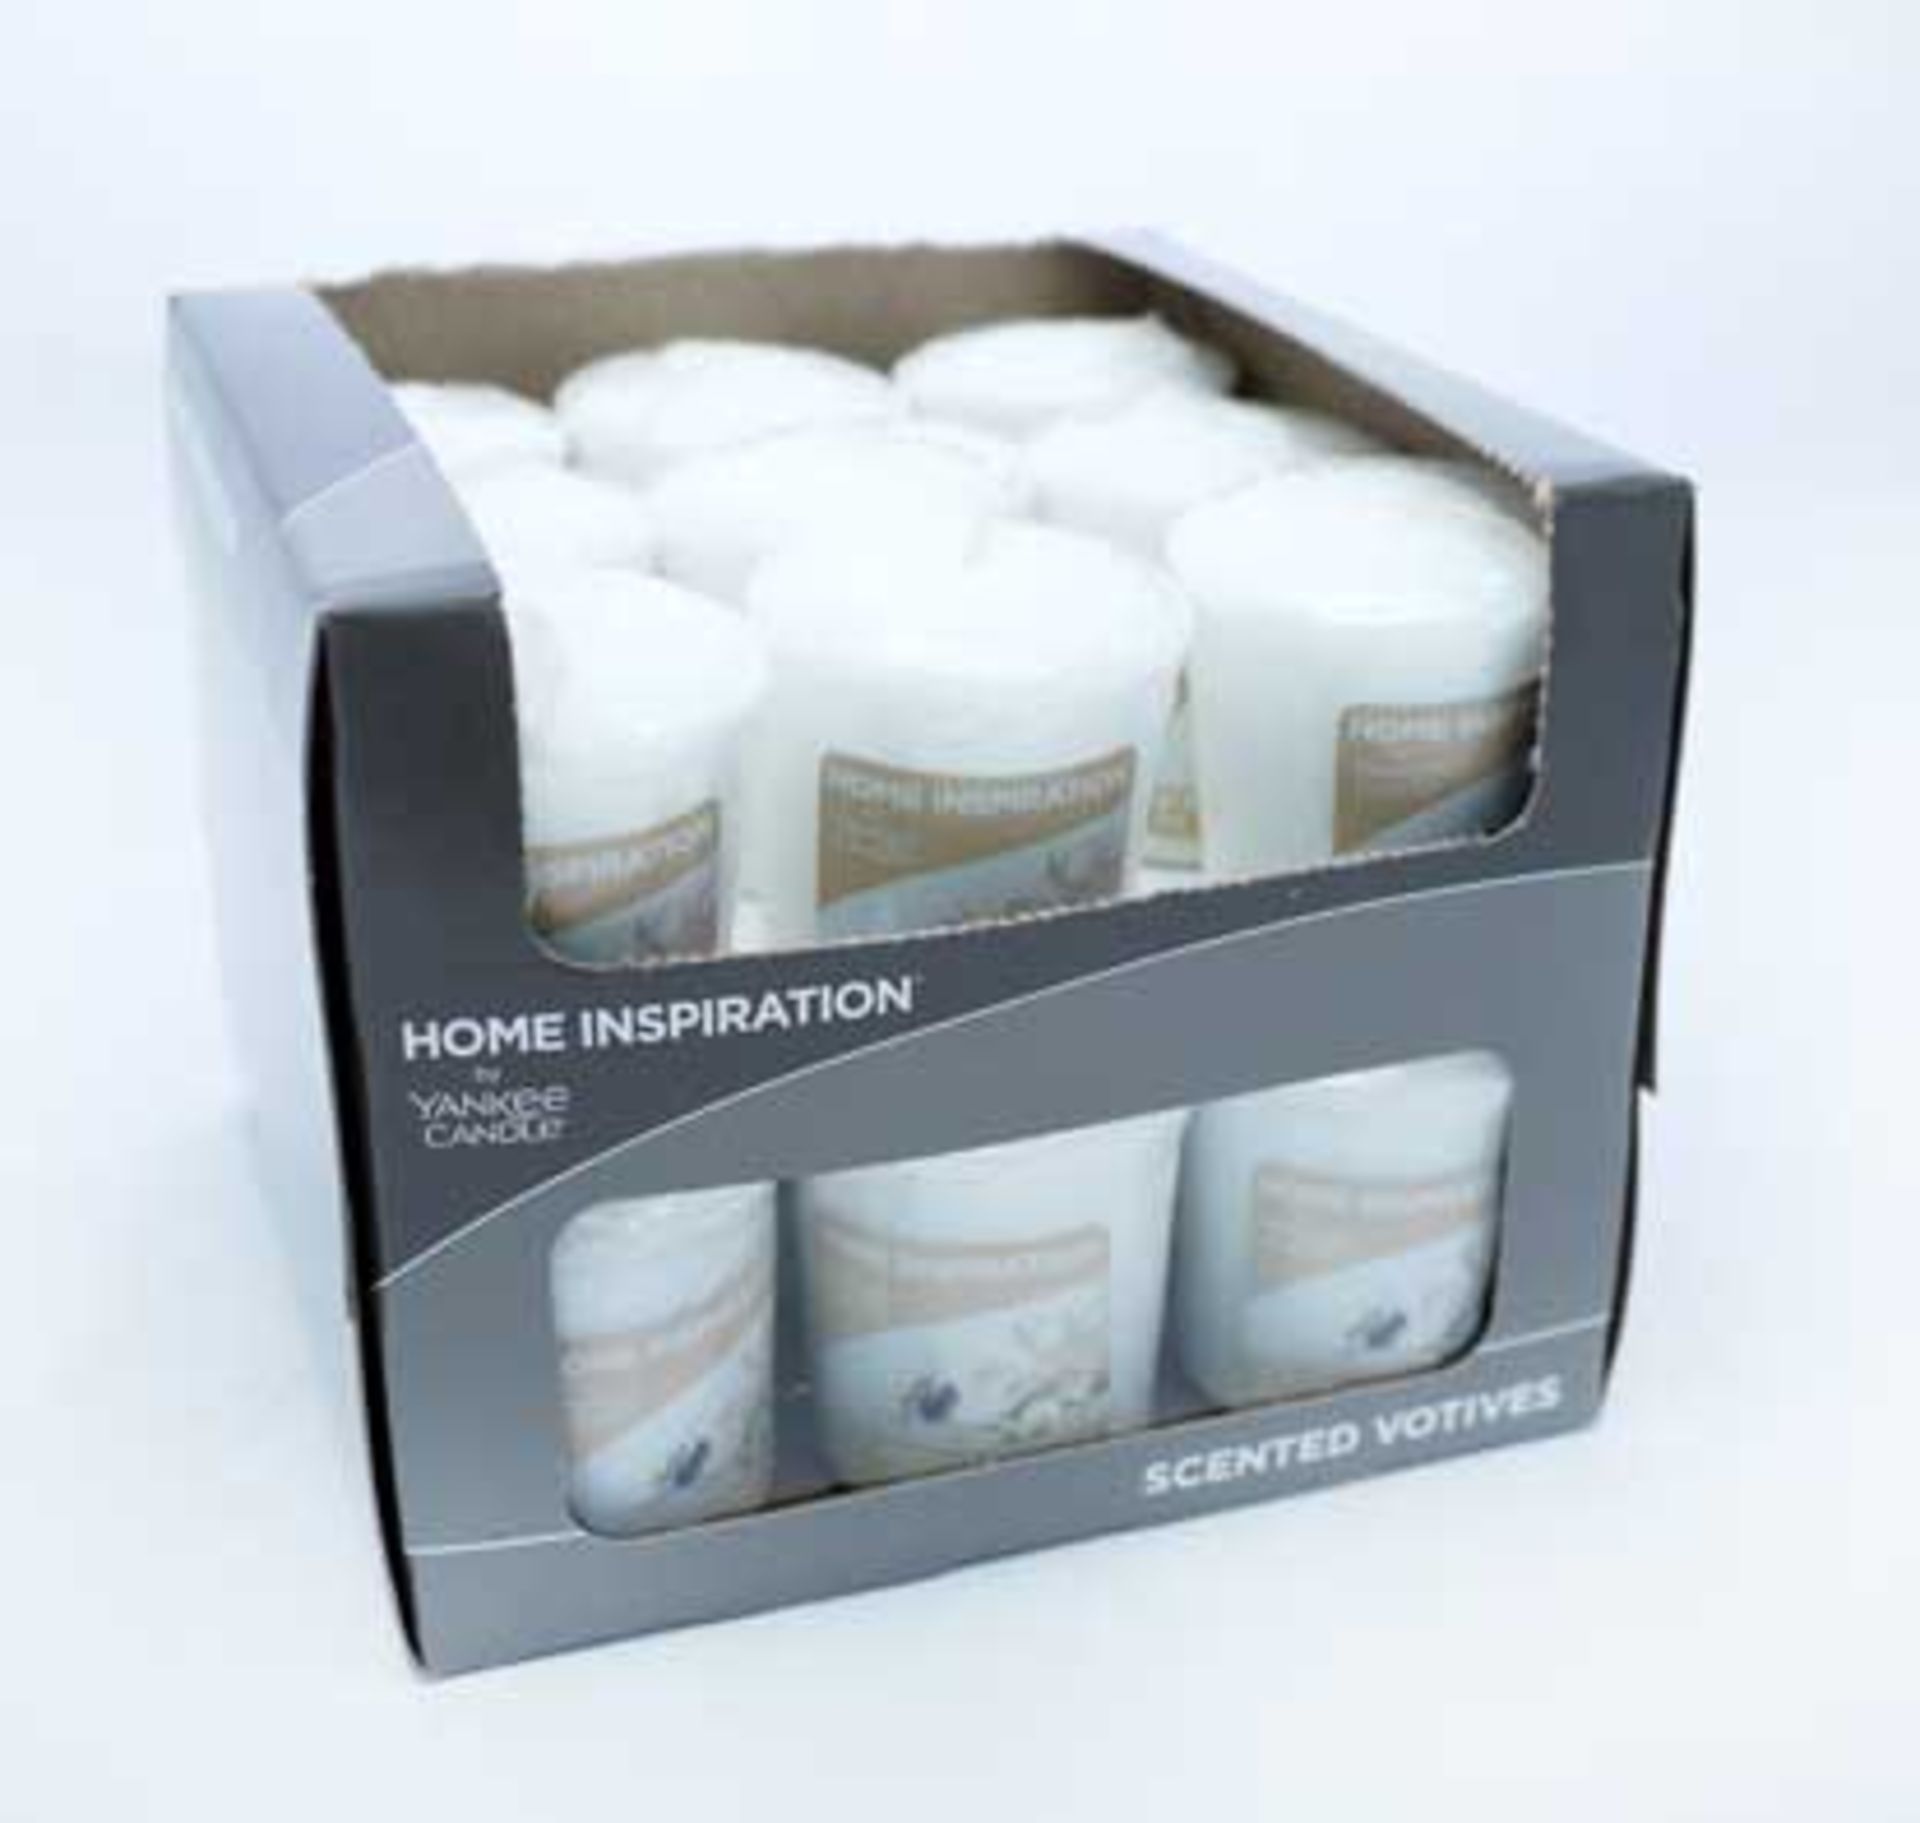 V Brand New 18 X Yankee Candle Votive White Linen & Lace - eBay Price £30.42 X 2 YOUR BID PRICE TO